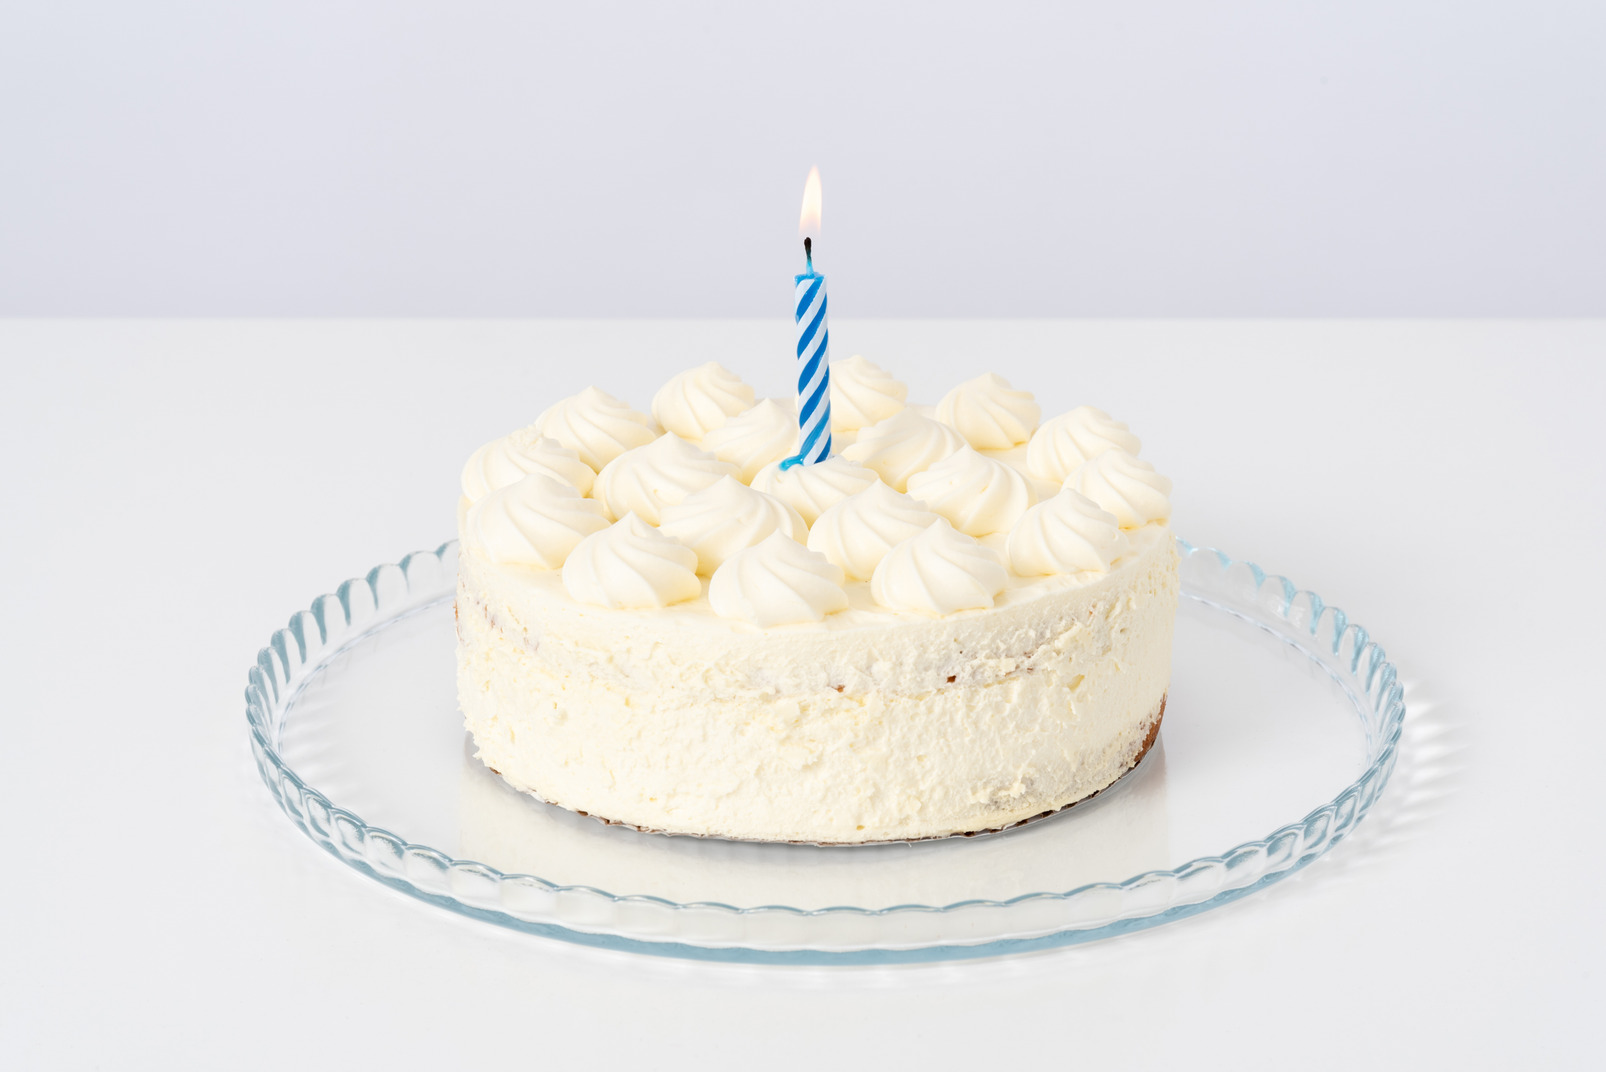 White cake with a candle on a glass plate